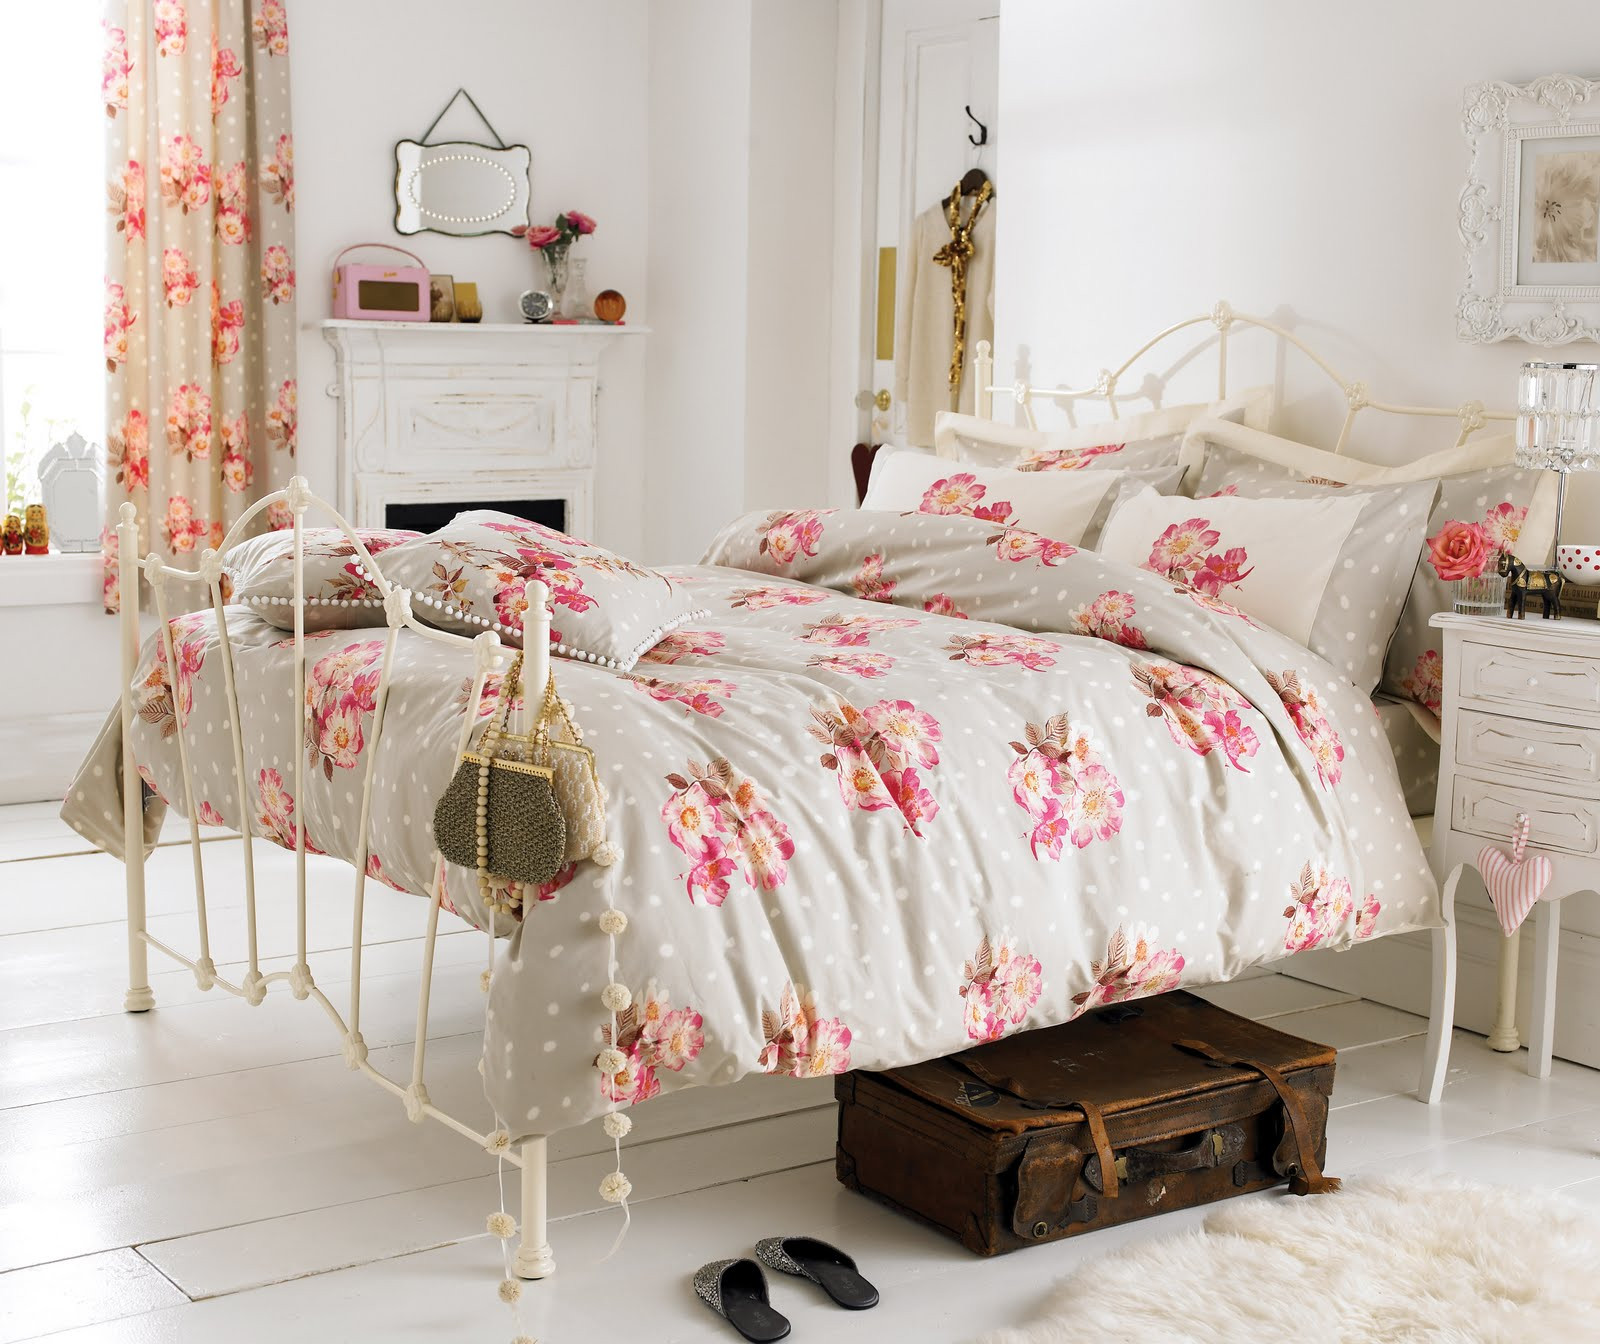 Shabby Chic Bedroom Furniture
 Vintage Your Room with 9 Shabby Chic Bedroom Furniture